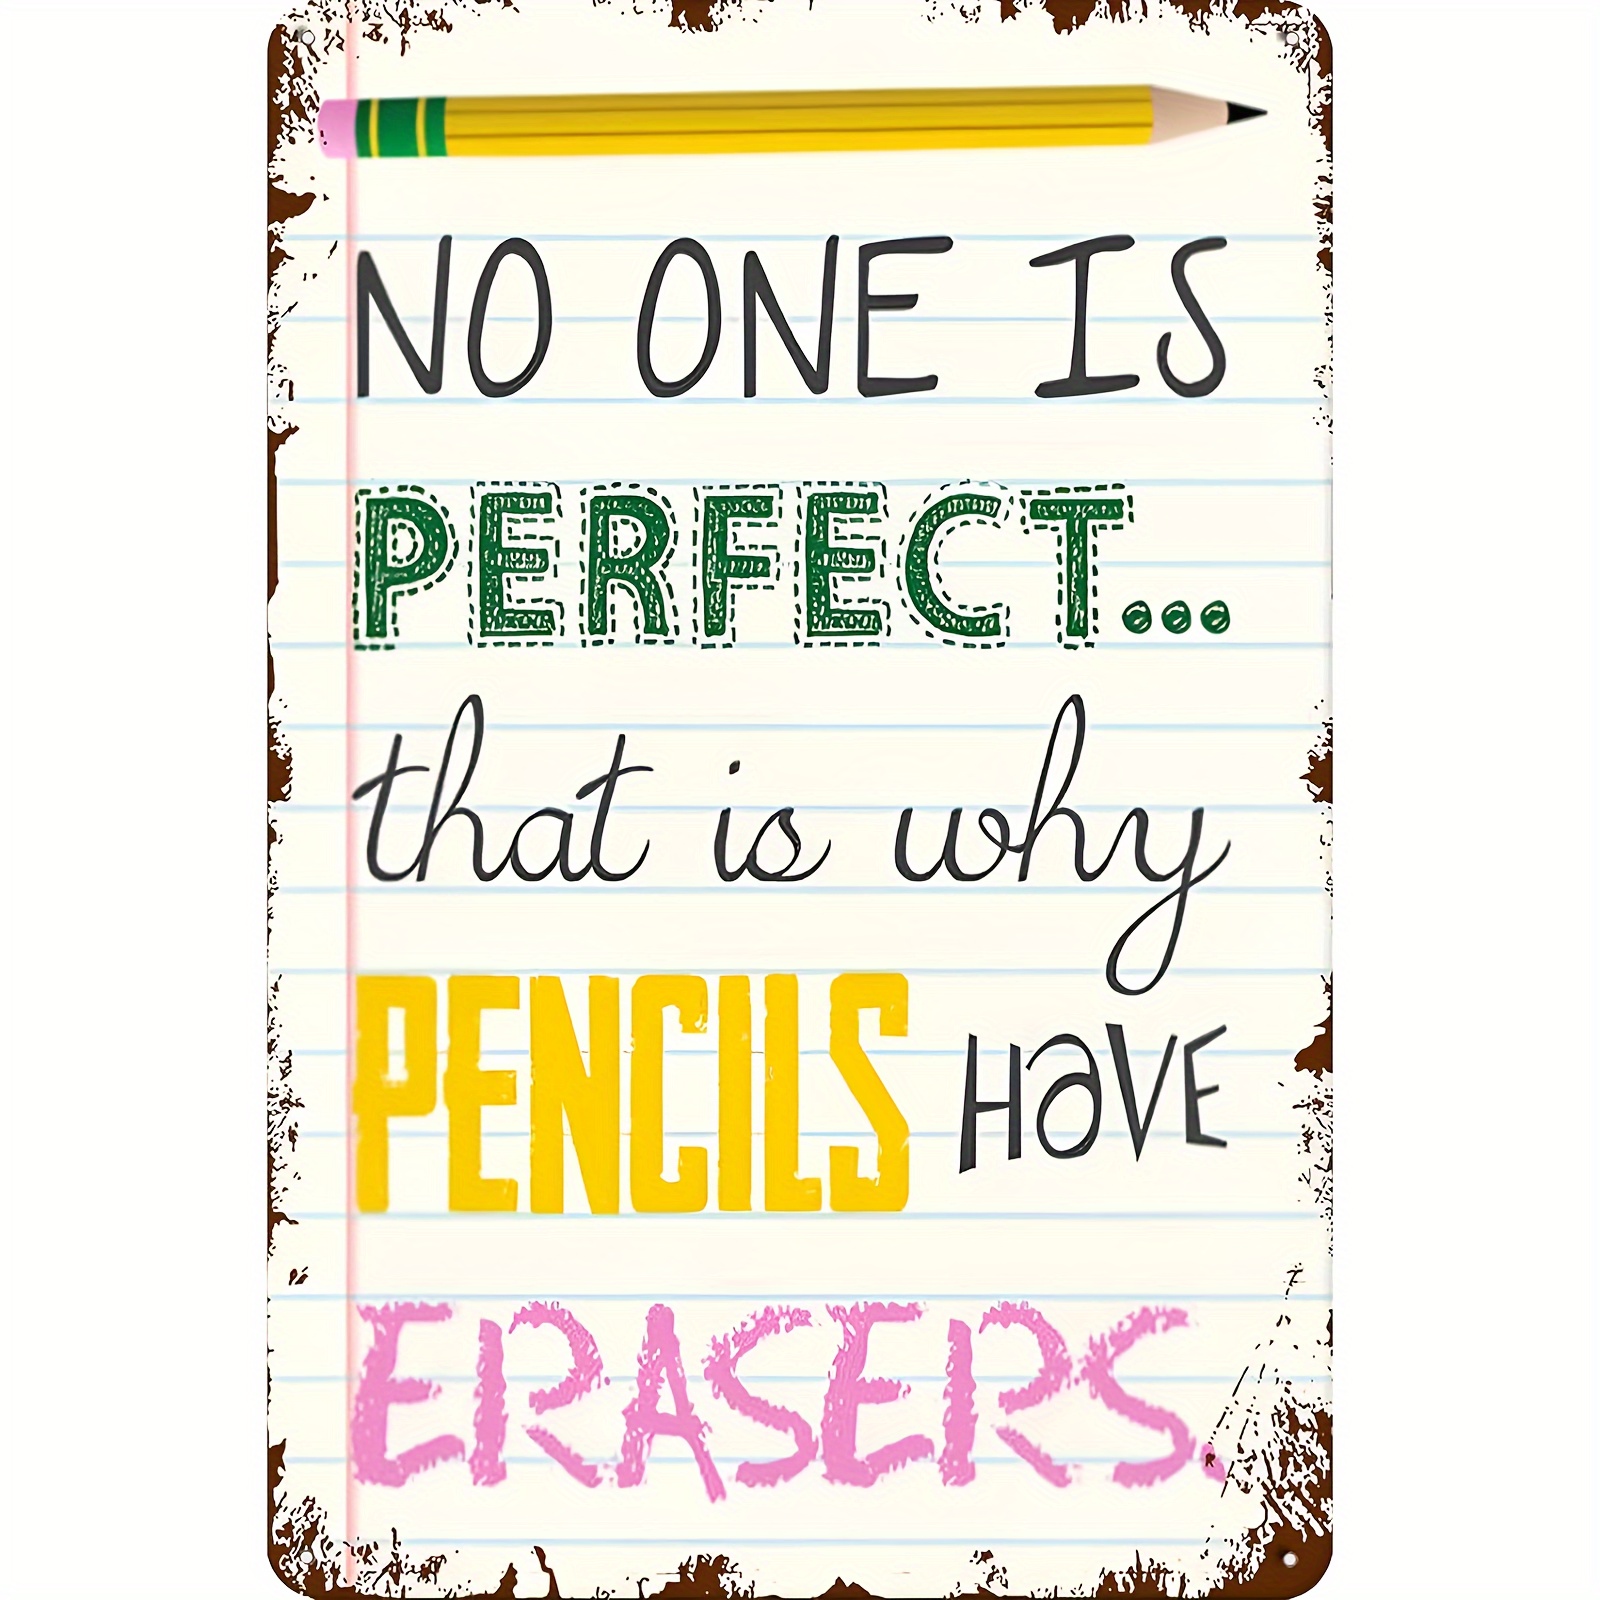 

No 1 Is Perfect That Is Why Pencils Have Erasers Teacher Sign Motivating Classroom Decor Inspirational Classroom Sign Classroom Art Tin Signs For Garage 8x12 Inch